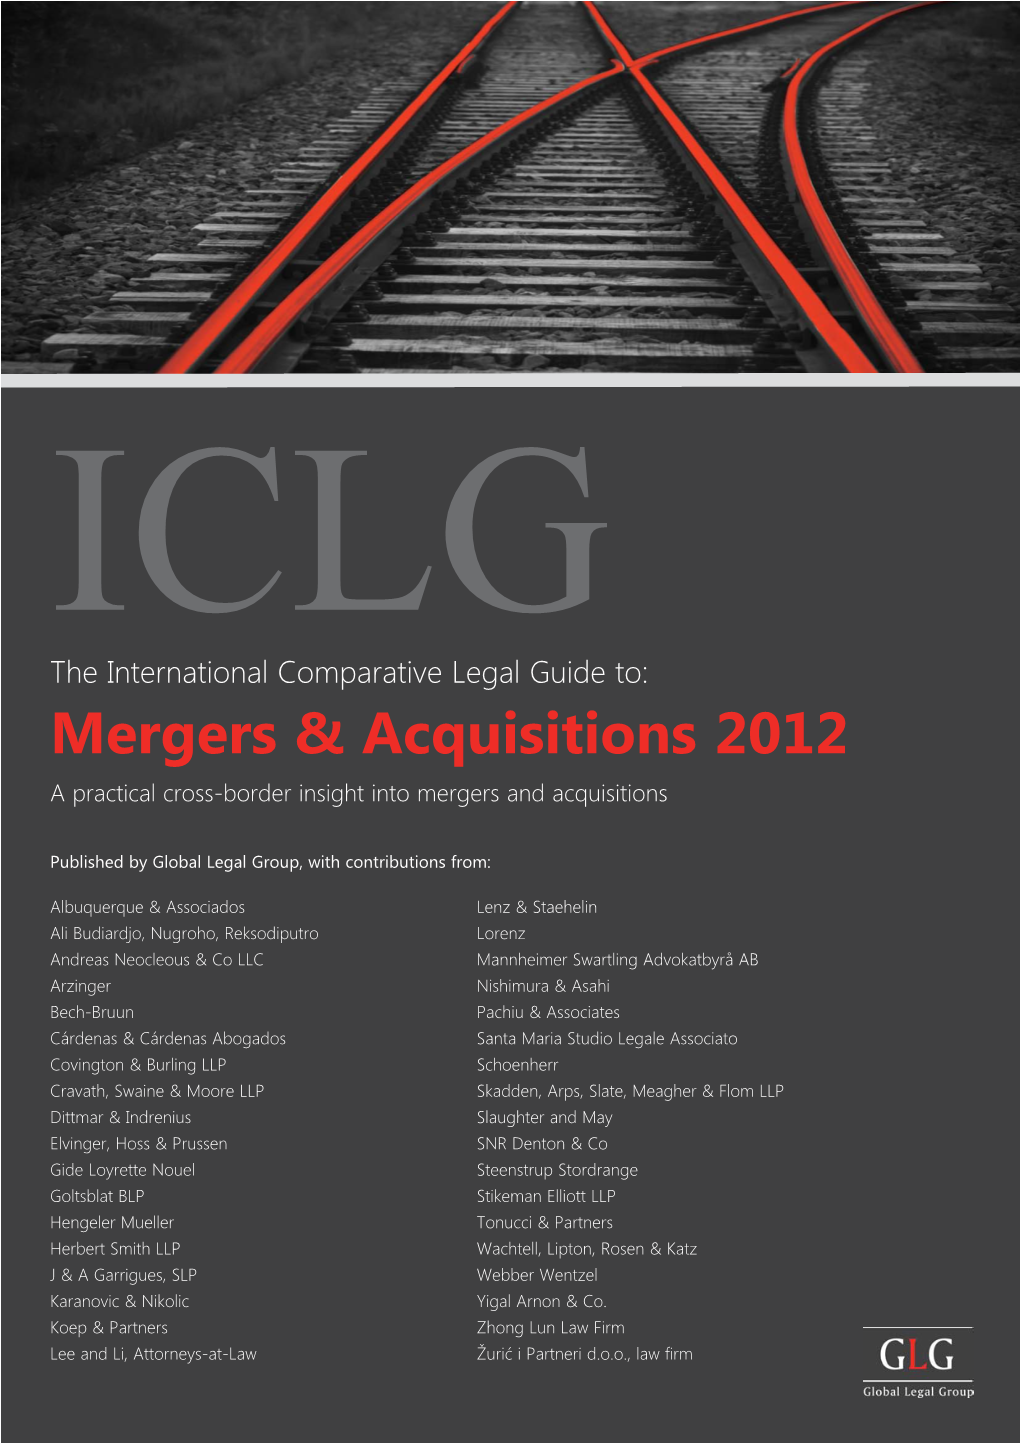 Mergers & Acquisitions 2012